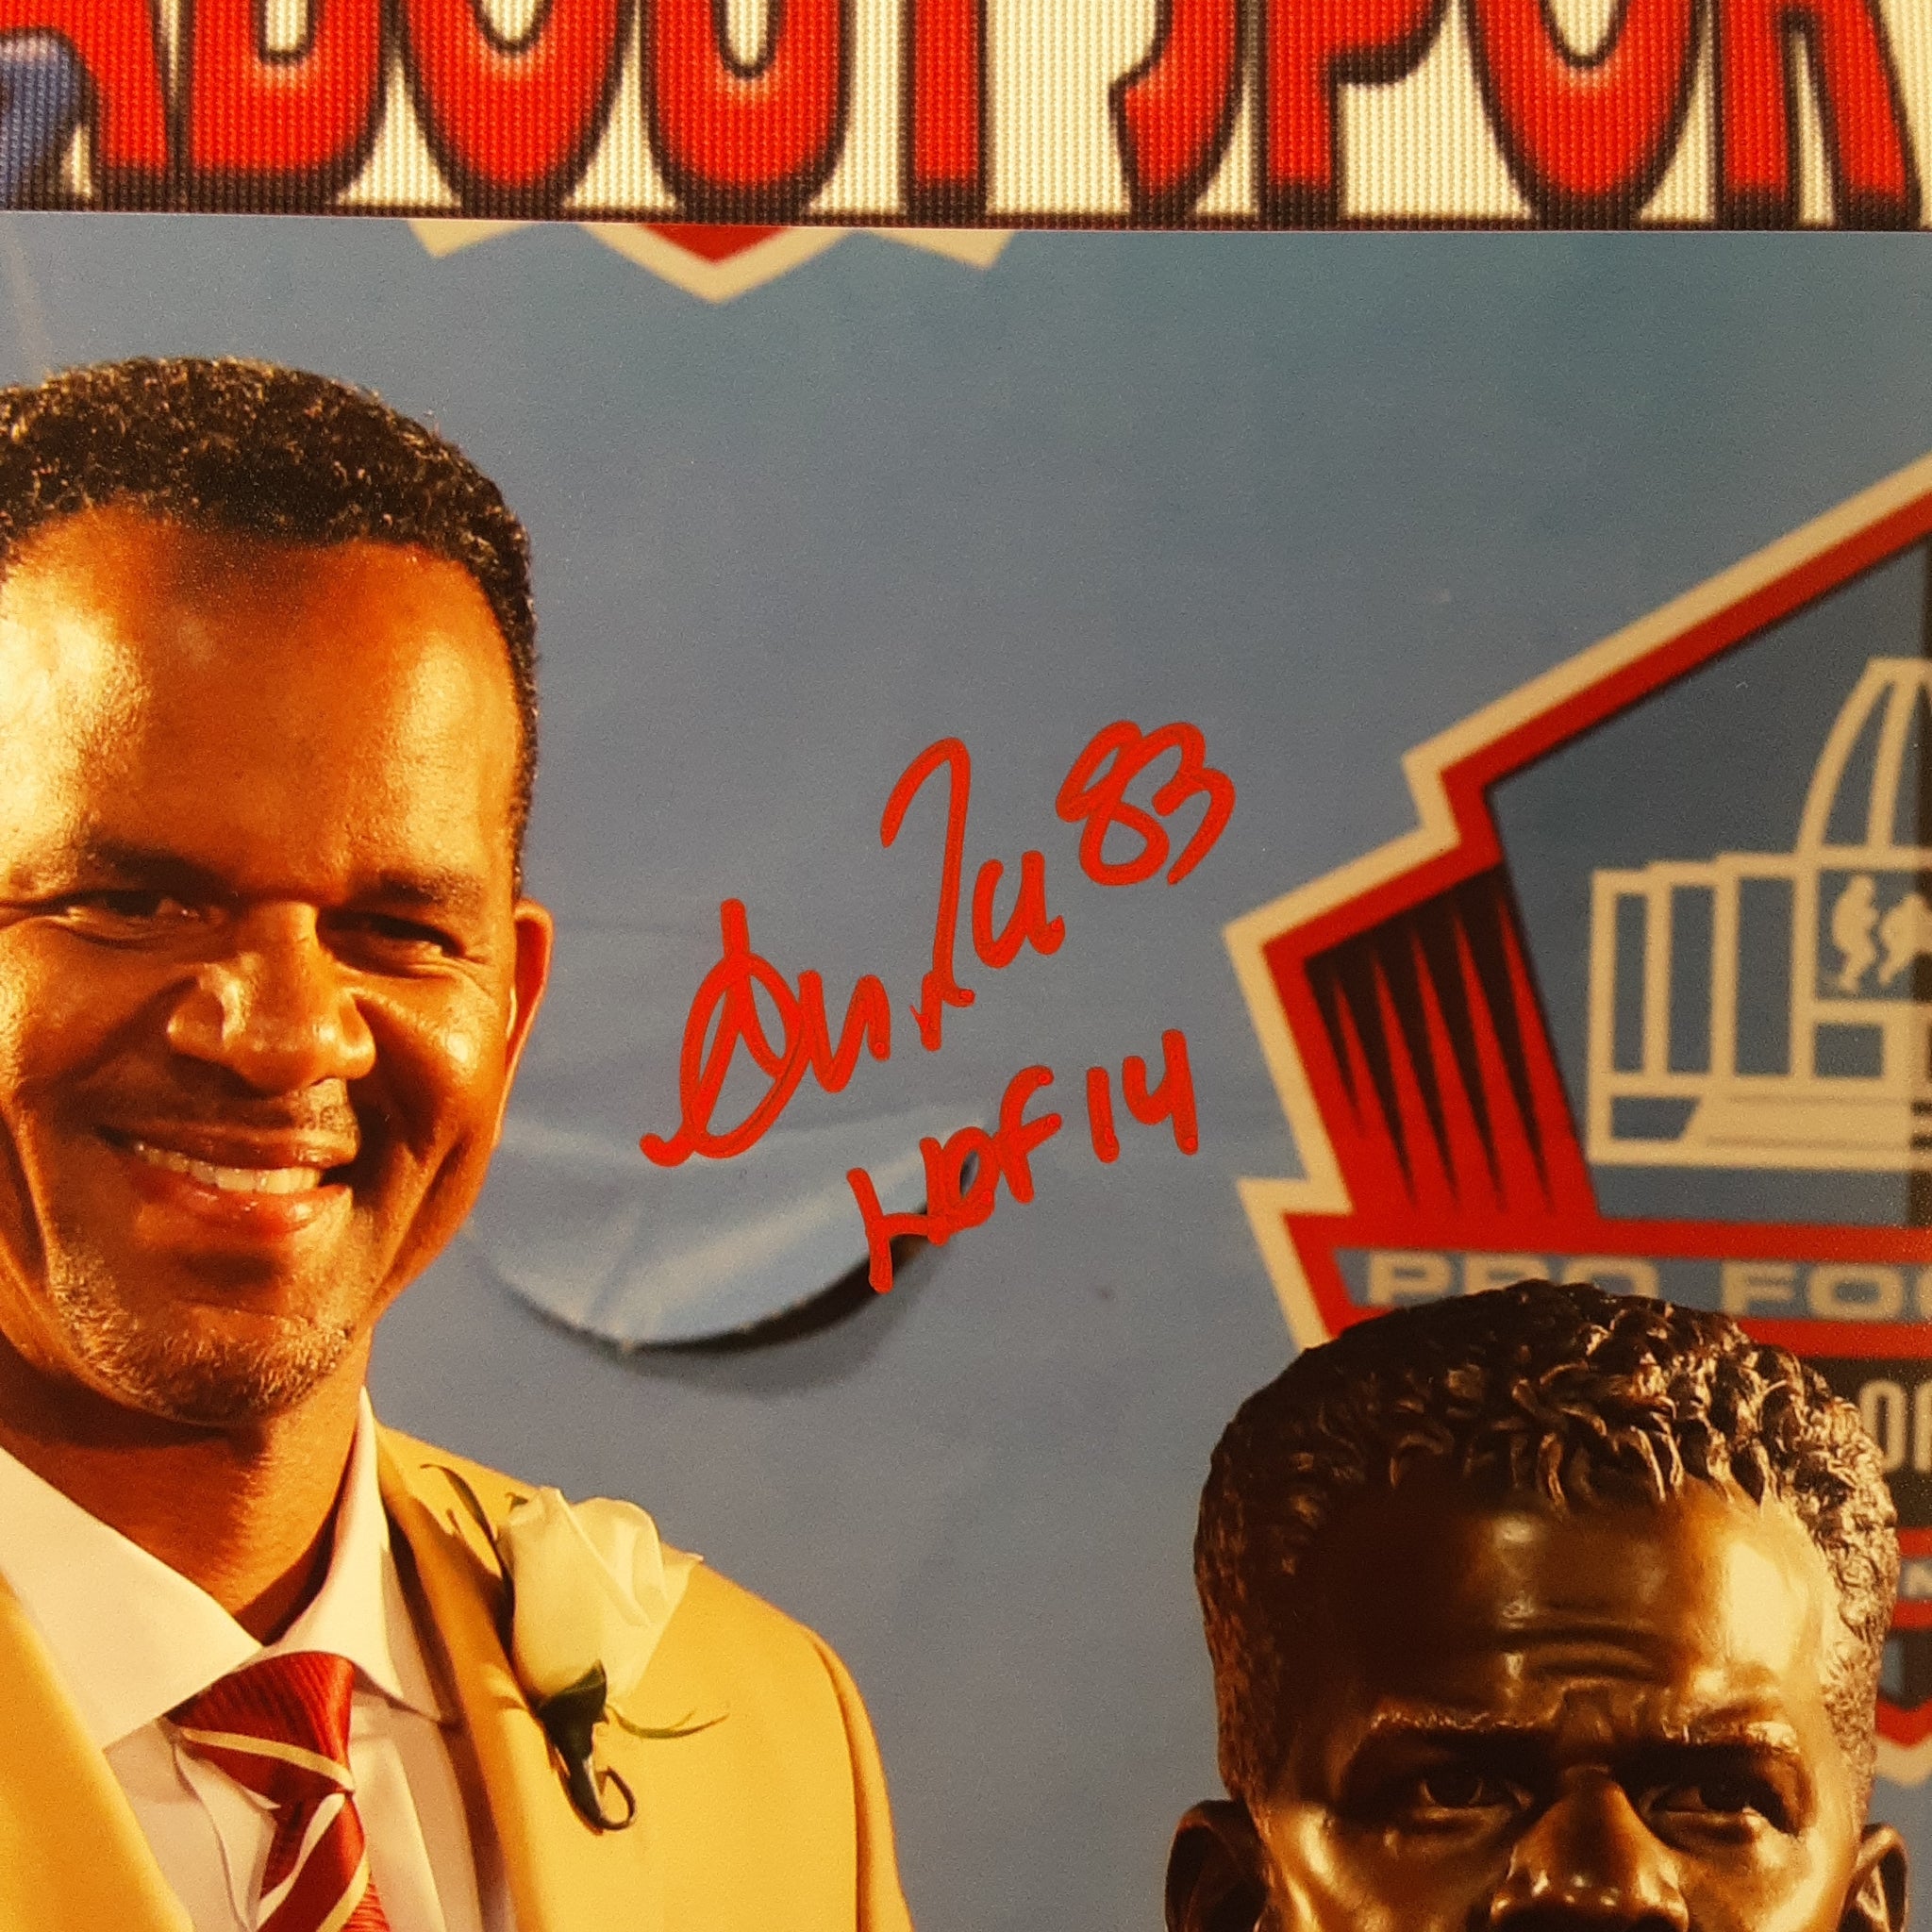 Andre Reed Authentic Signed 8x10 Photo Autographed JSA.